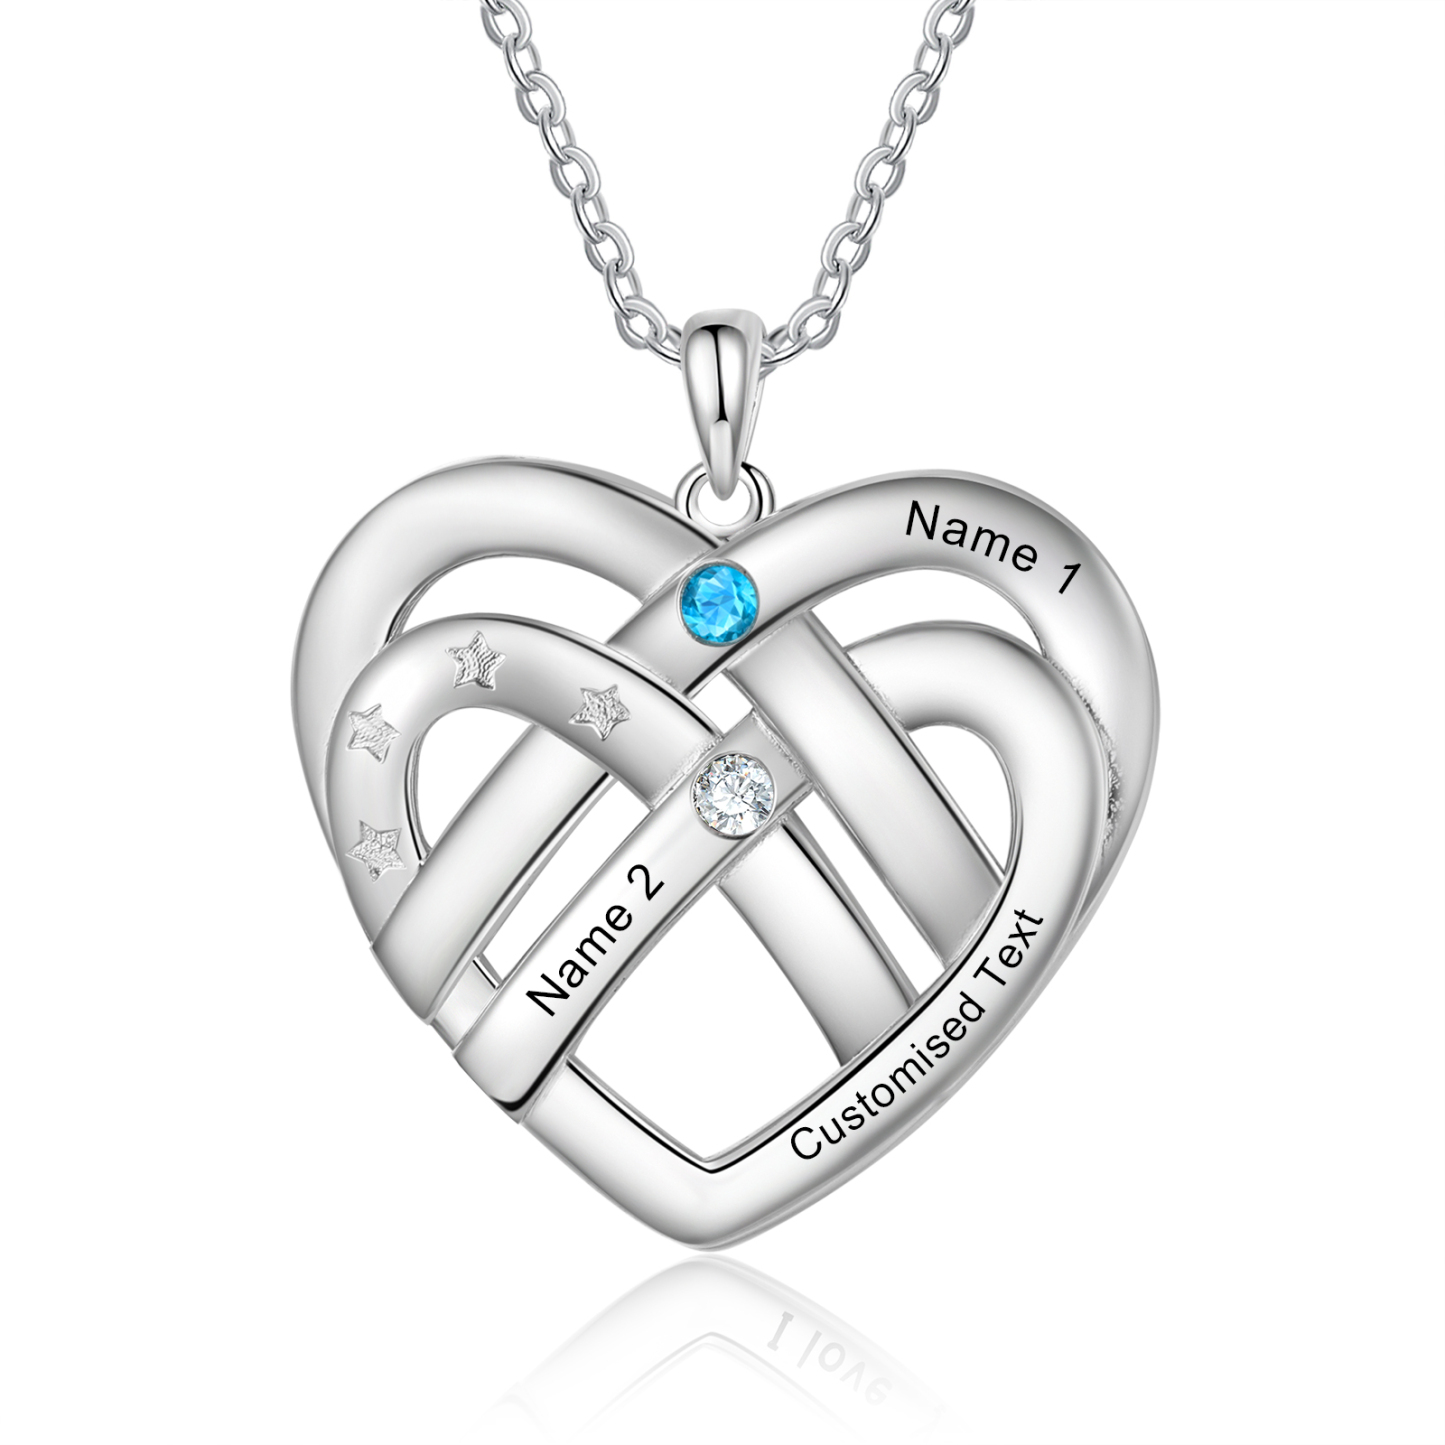 2 Names - Personalized Double Layer Heart Necklace with Custom Name and Birthstone, As a Mother's Day Gift for Mom